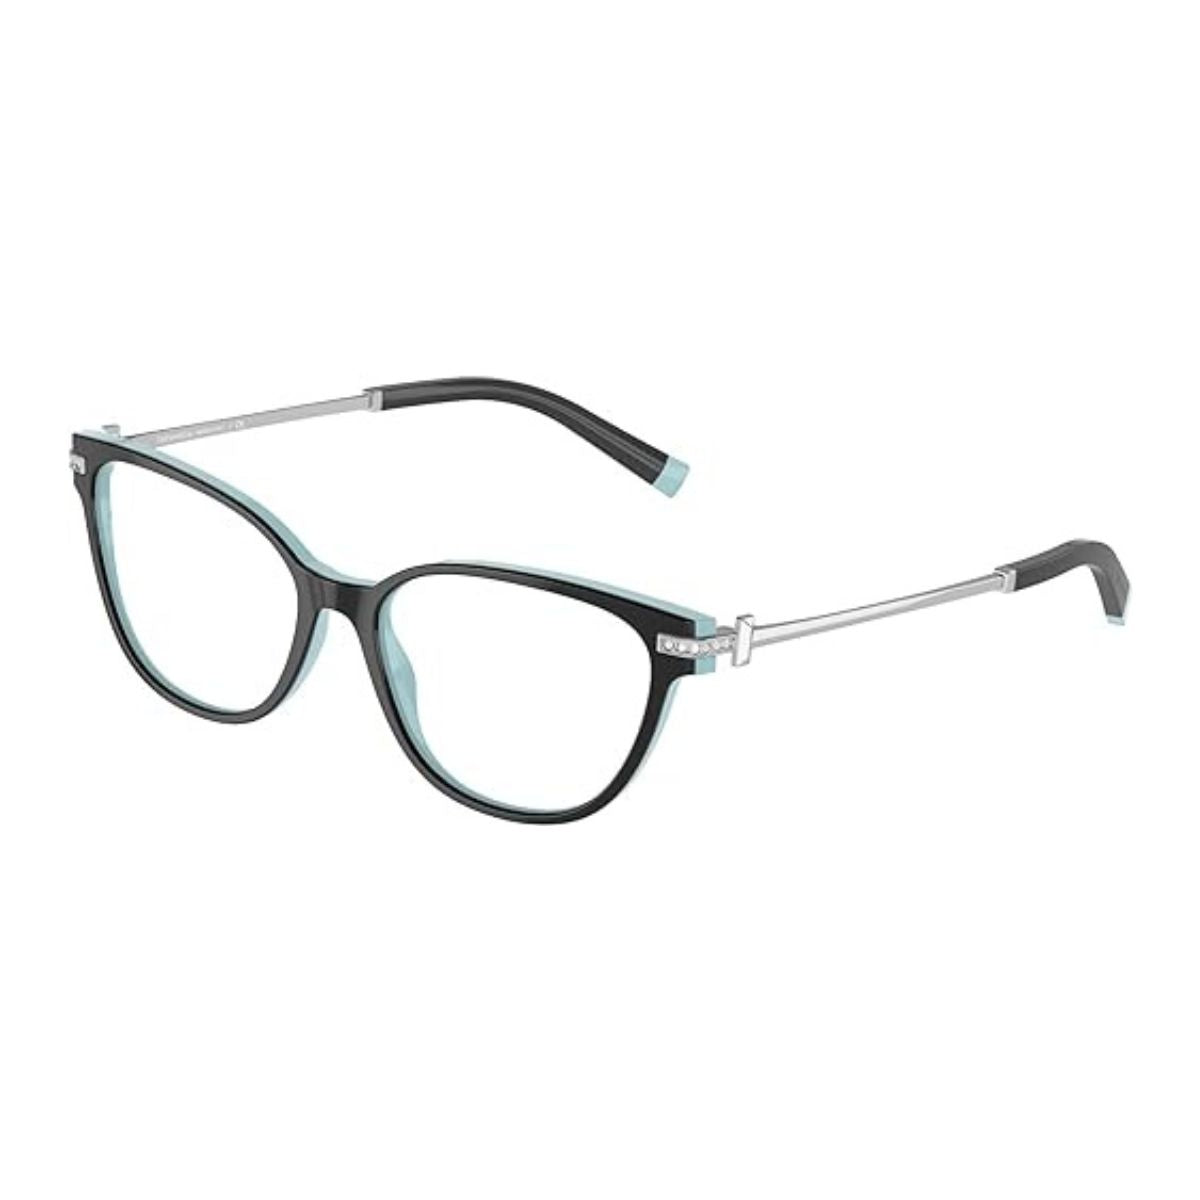 "shop Tiffany And Co 2223-B 8055 optical eyewear glasses frame for women's at optorium"